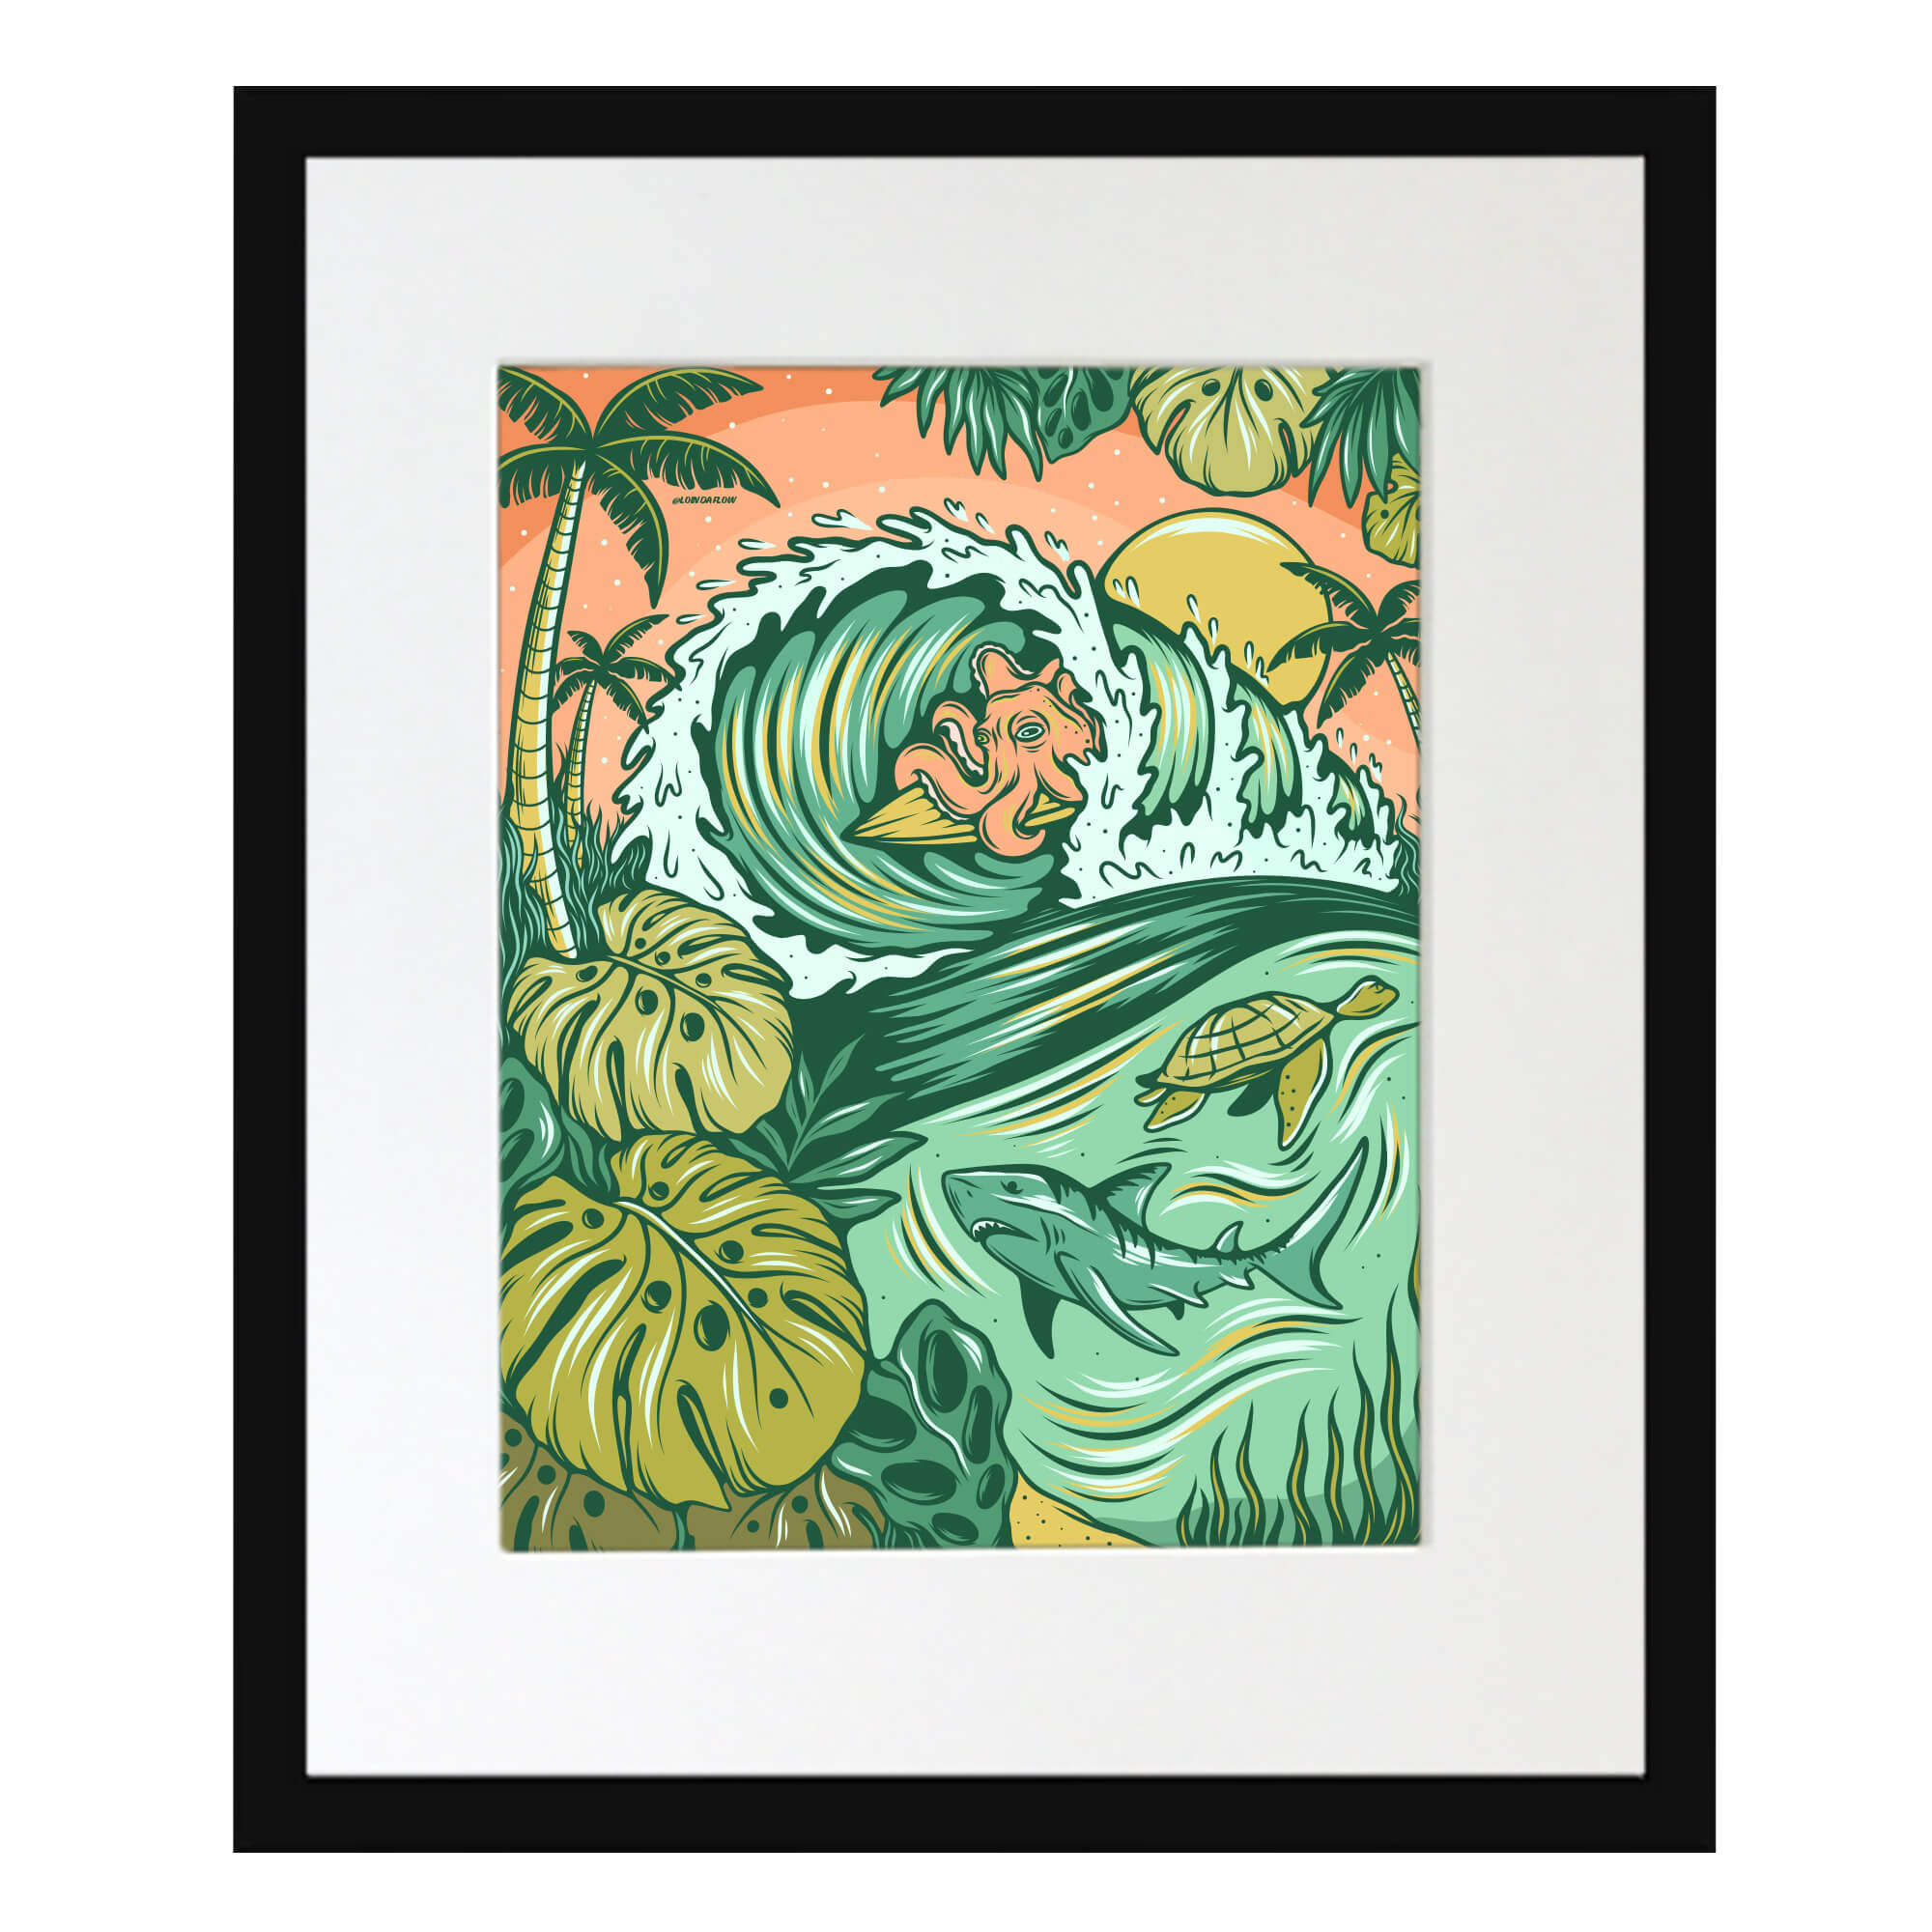 Matted art print of an octopus riding a surfboard with large crashing waves by Hawaii artist Laihha Organna